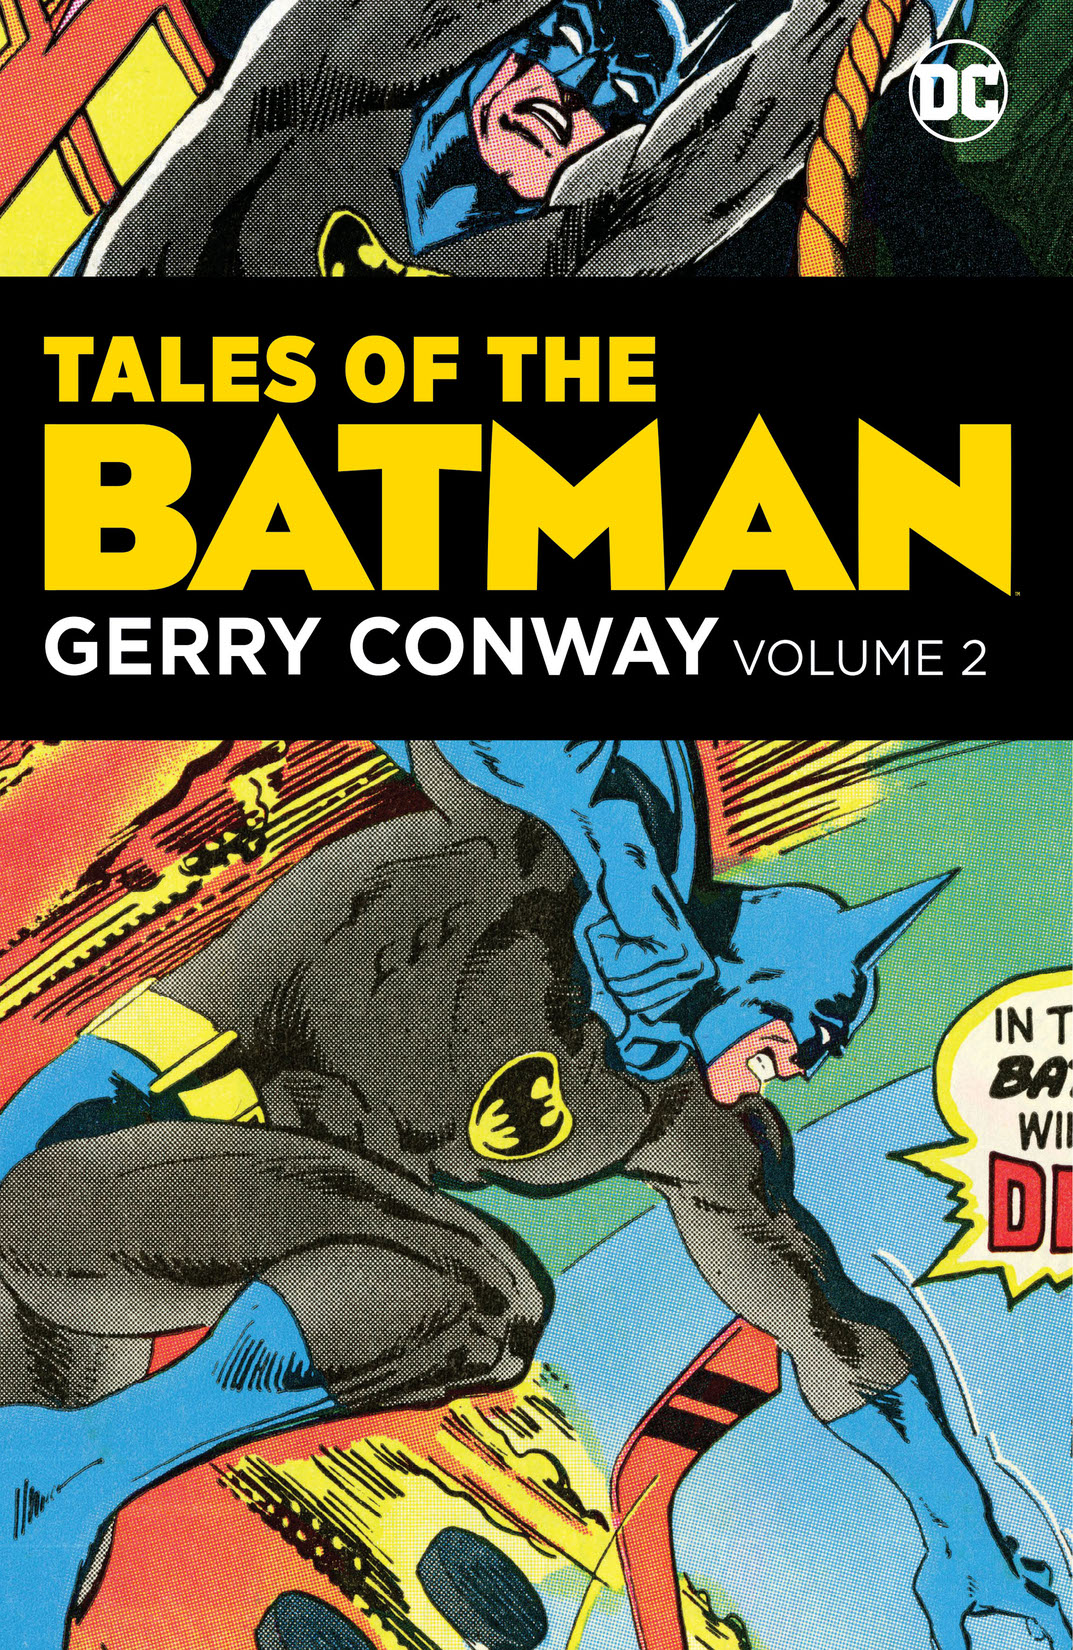 Tales of the Batman: Gerry Conway Vol. 2 preview images